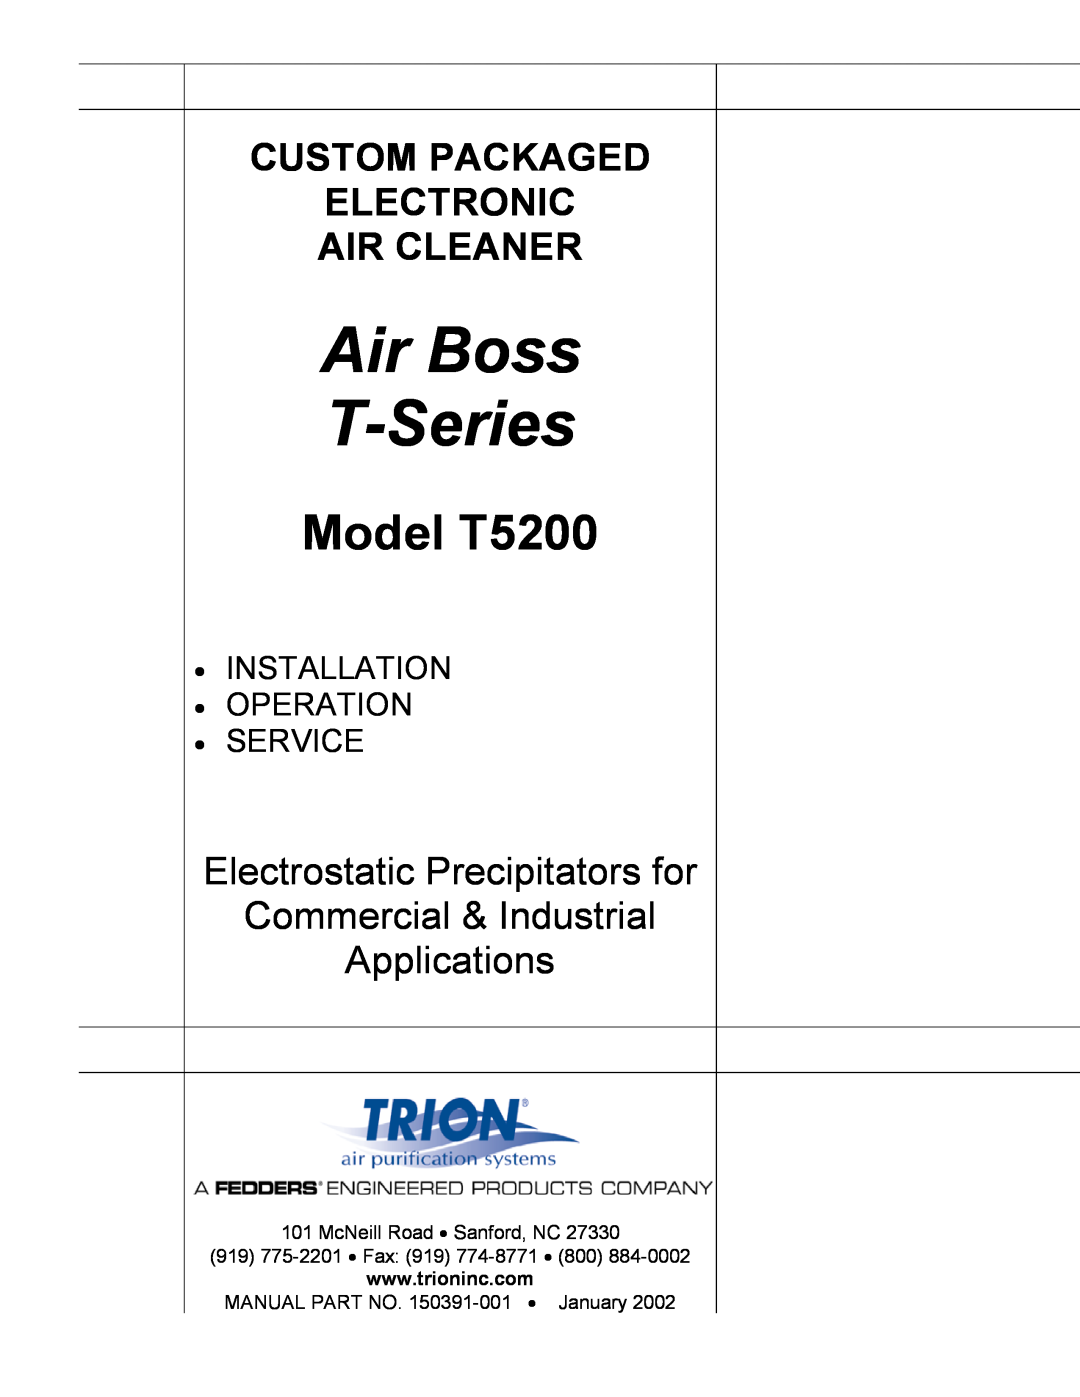 Trion manual Air Boss T-Series, Model T5200, Custom Packaged Electronic Air Cleaner, Electrostatic Precipitators for 